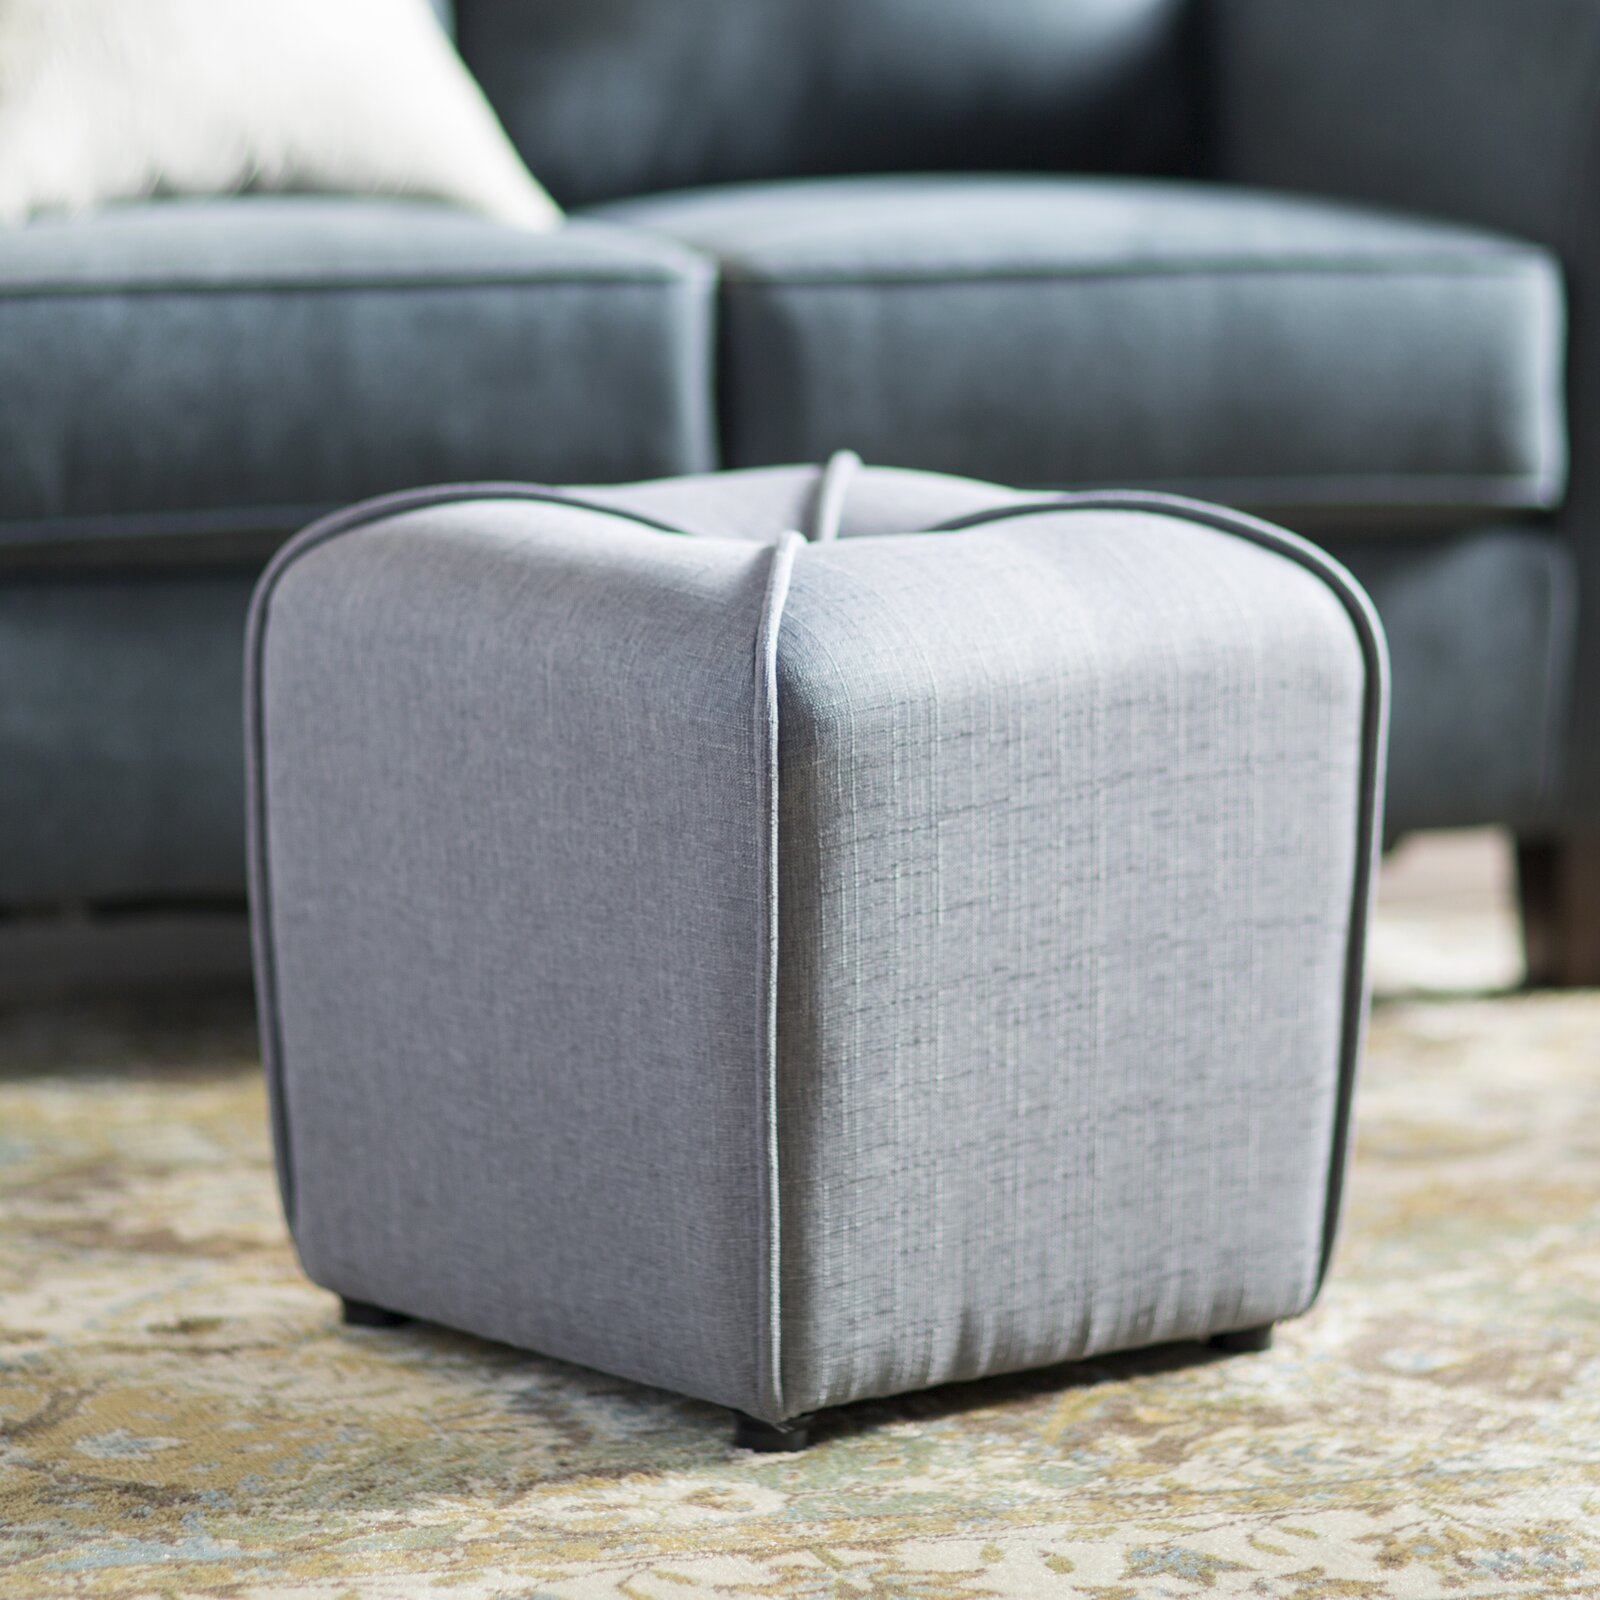 Quane 16.5" Tufted Square Cube Ottoman, Shape: Square, Weight Capacity: 150 - image 1 of 5